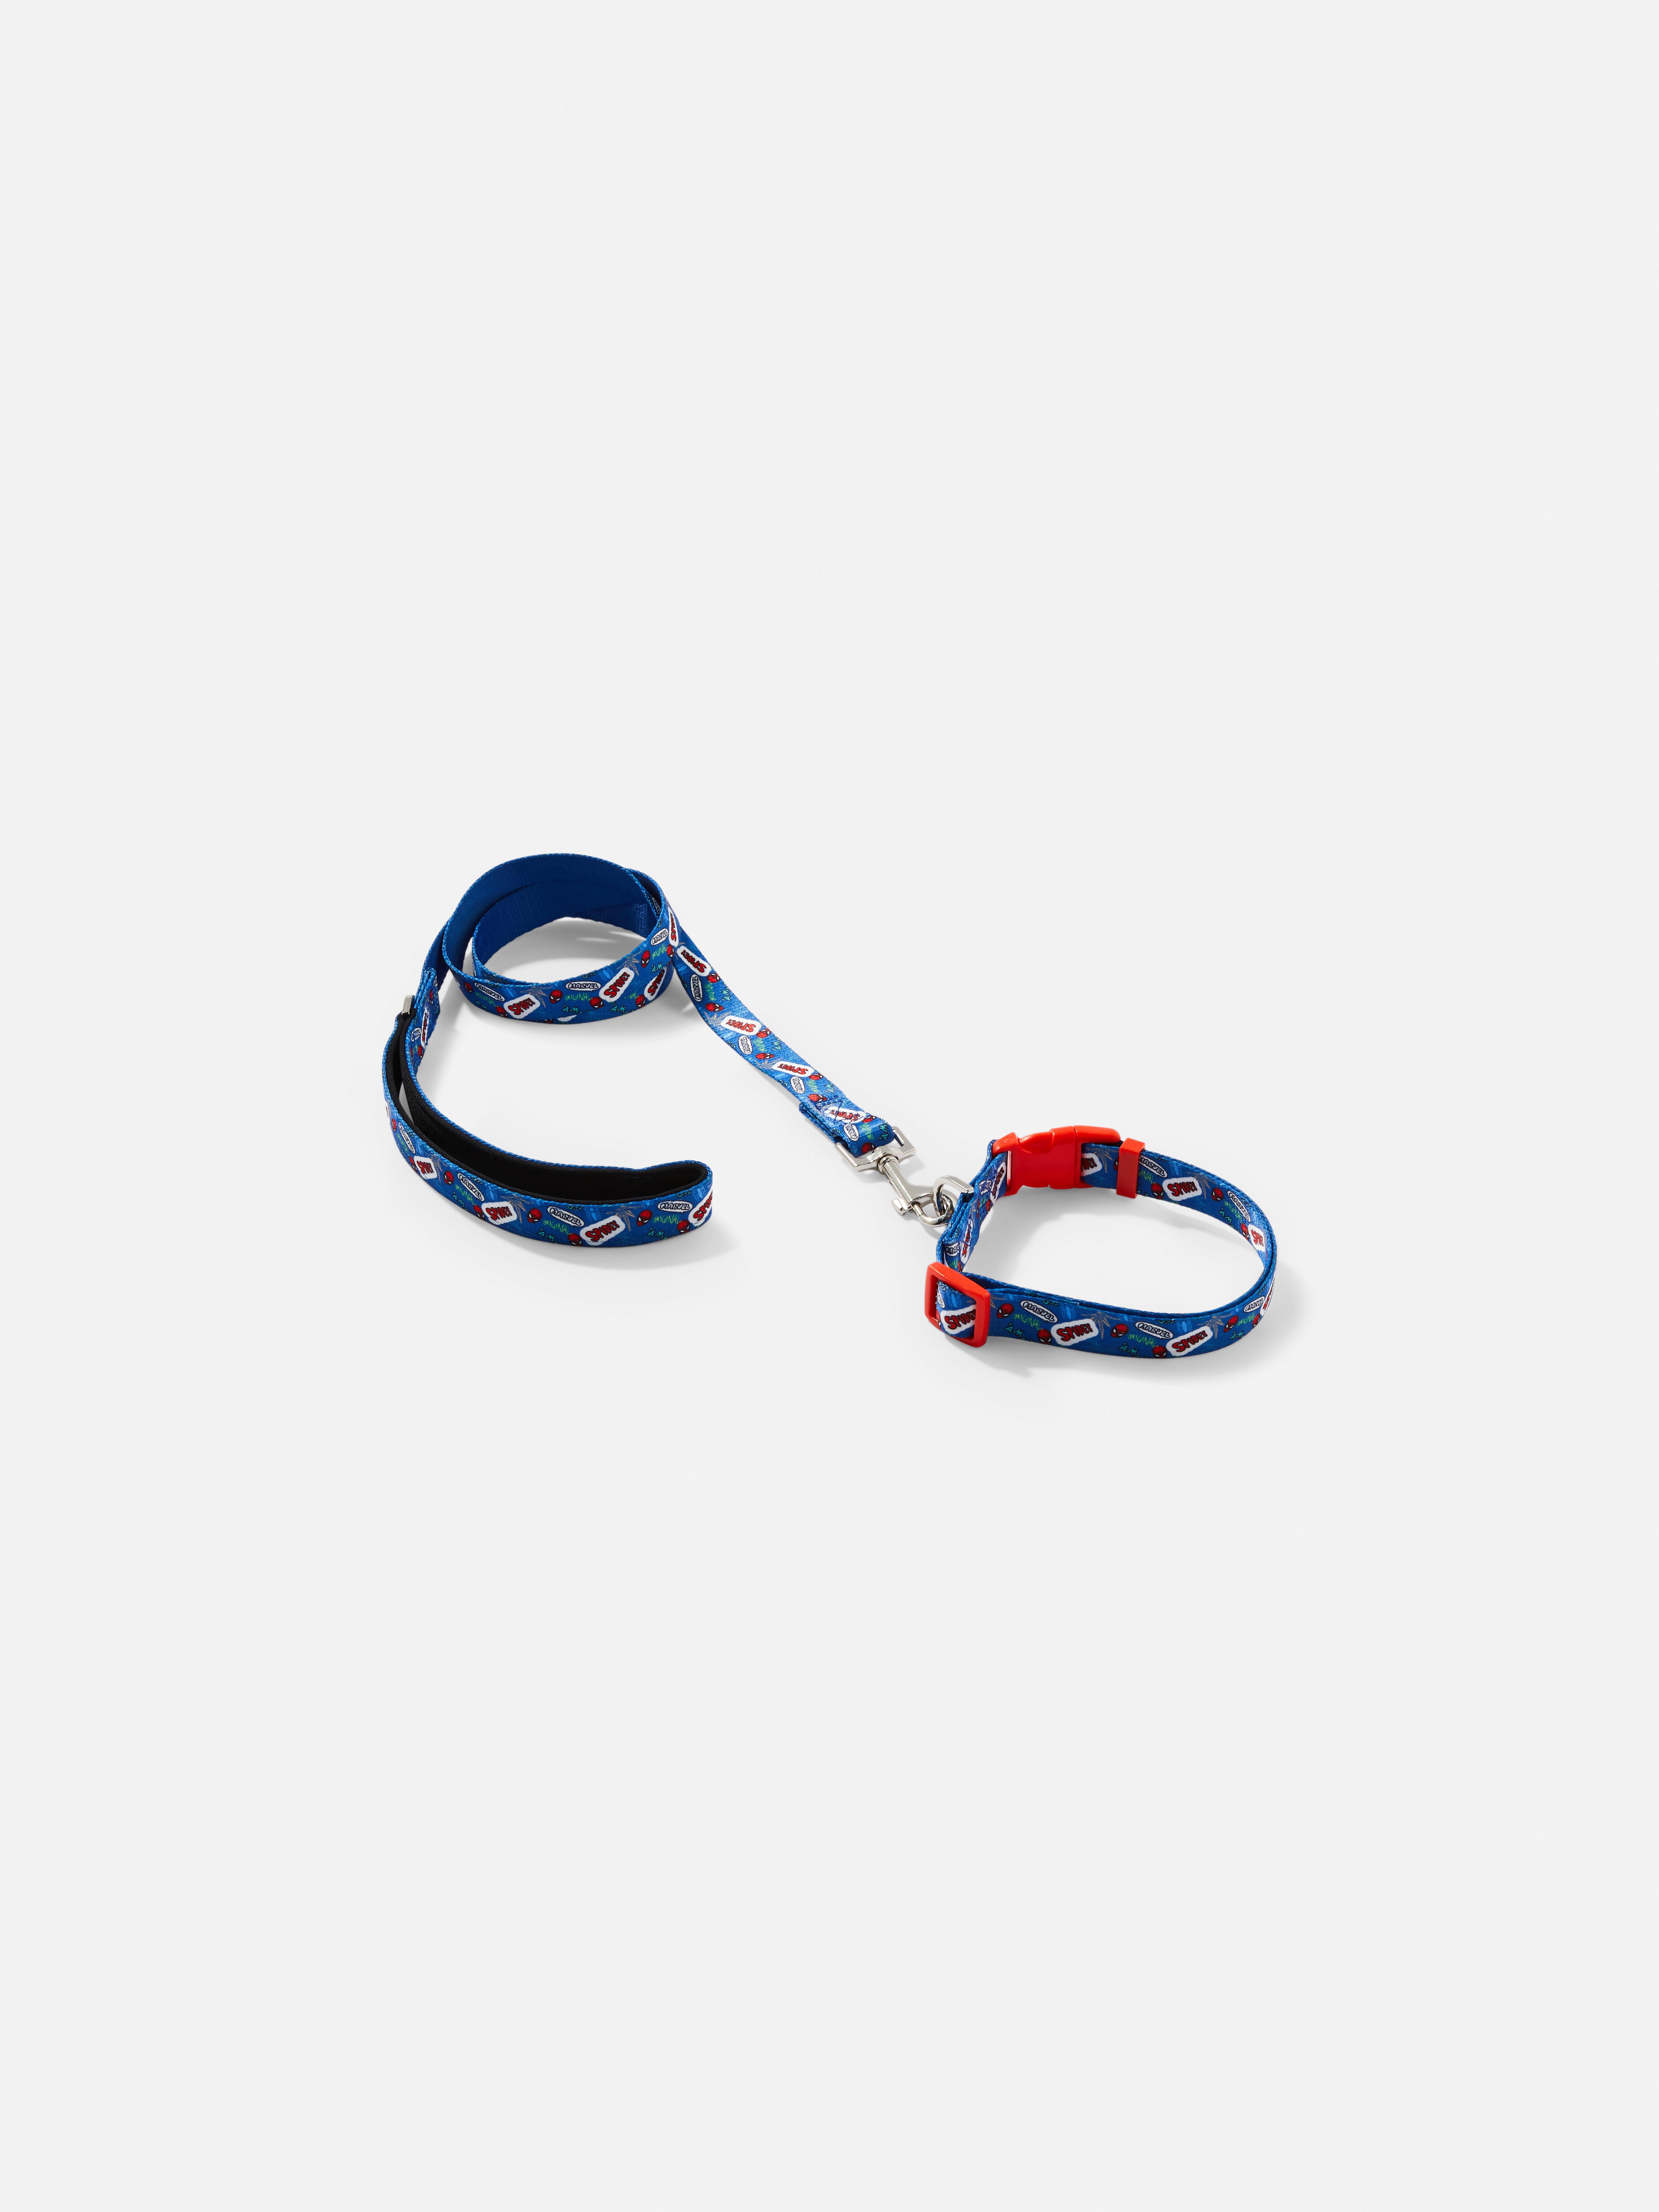 Marvel Spider-Man Pet Lead and Collar